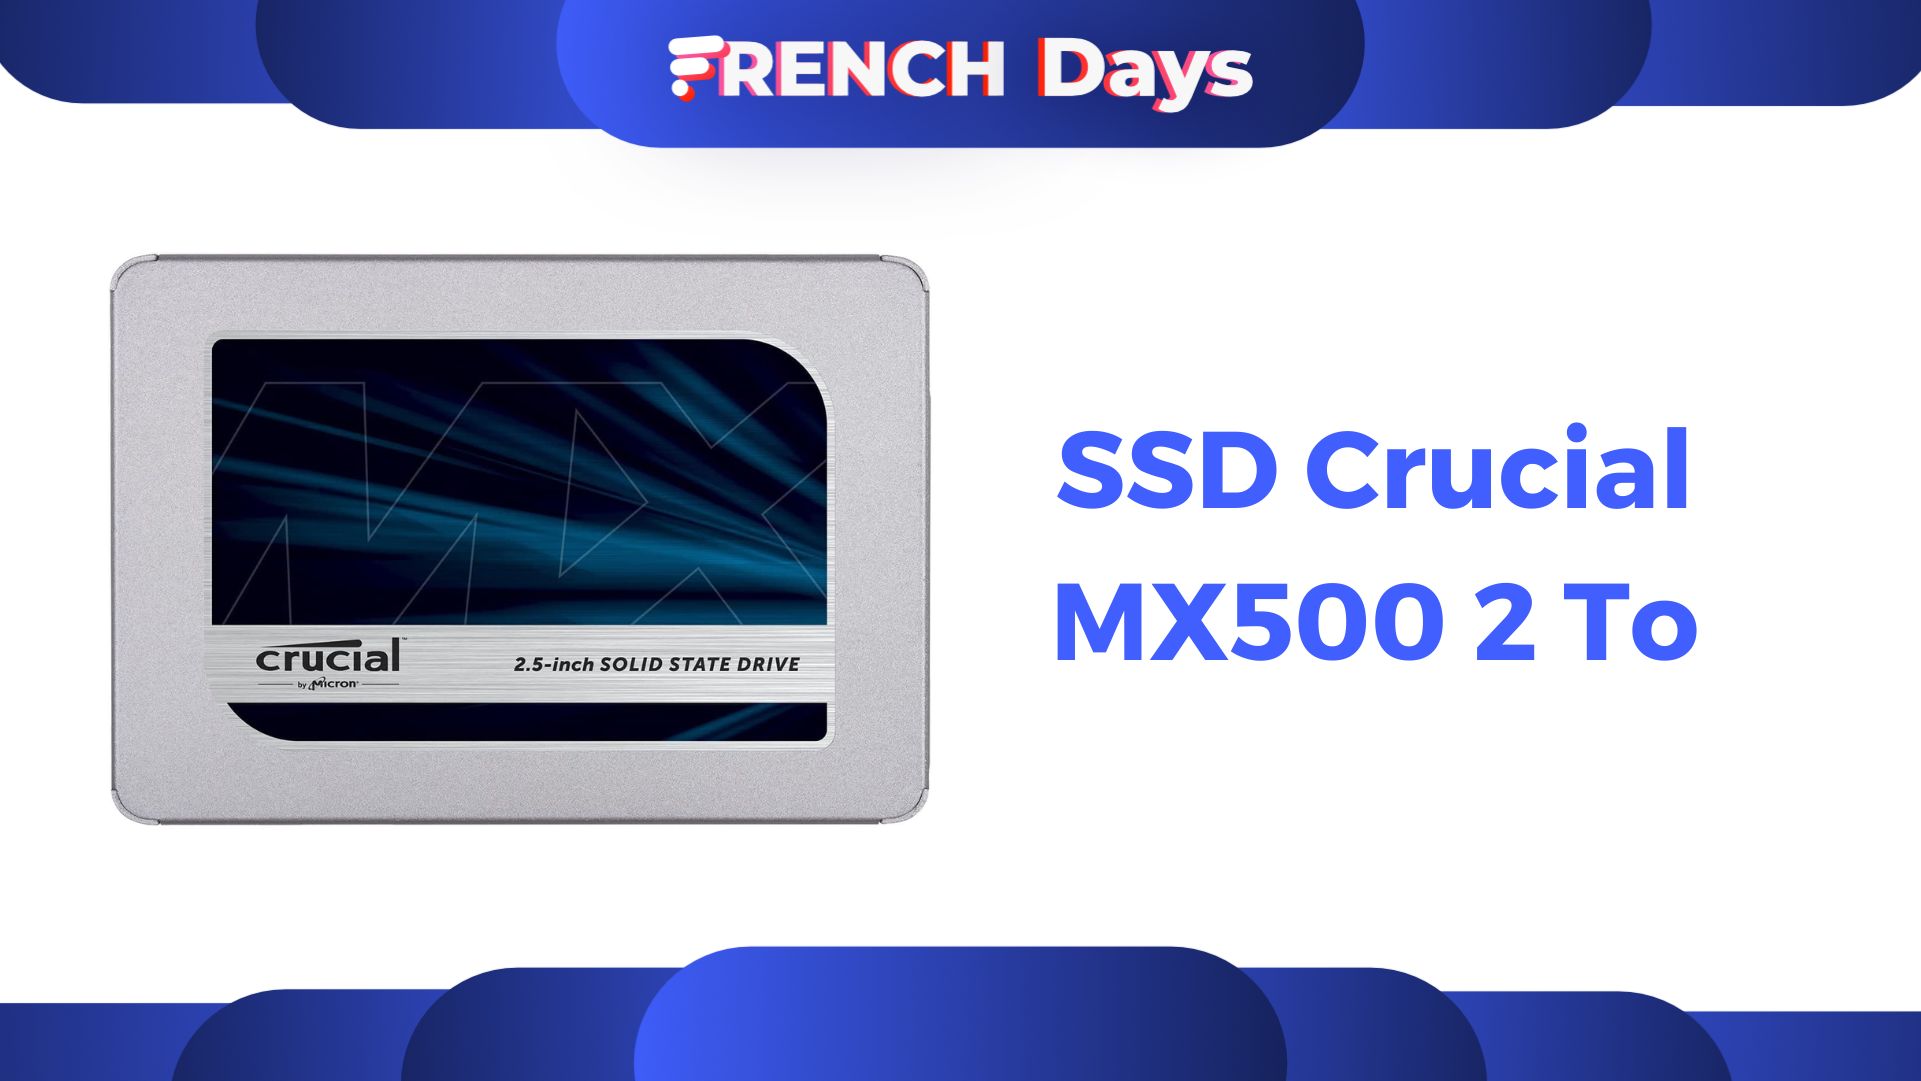 https://images.frandroid.com/wp-content/uploads/2022/09/ssd-curcial-mx500-2-to-french-days-2022.jpg